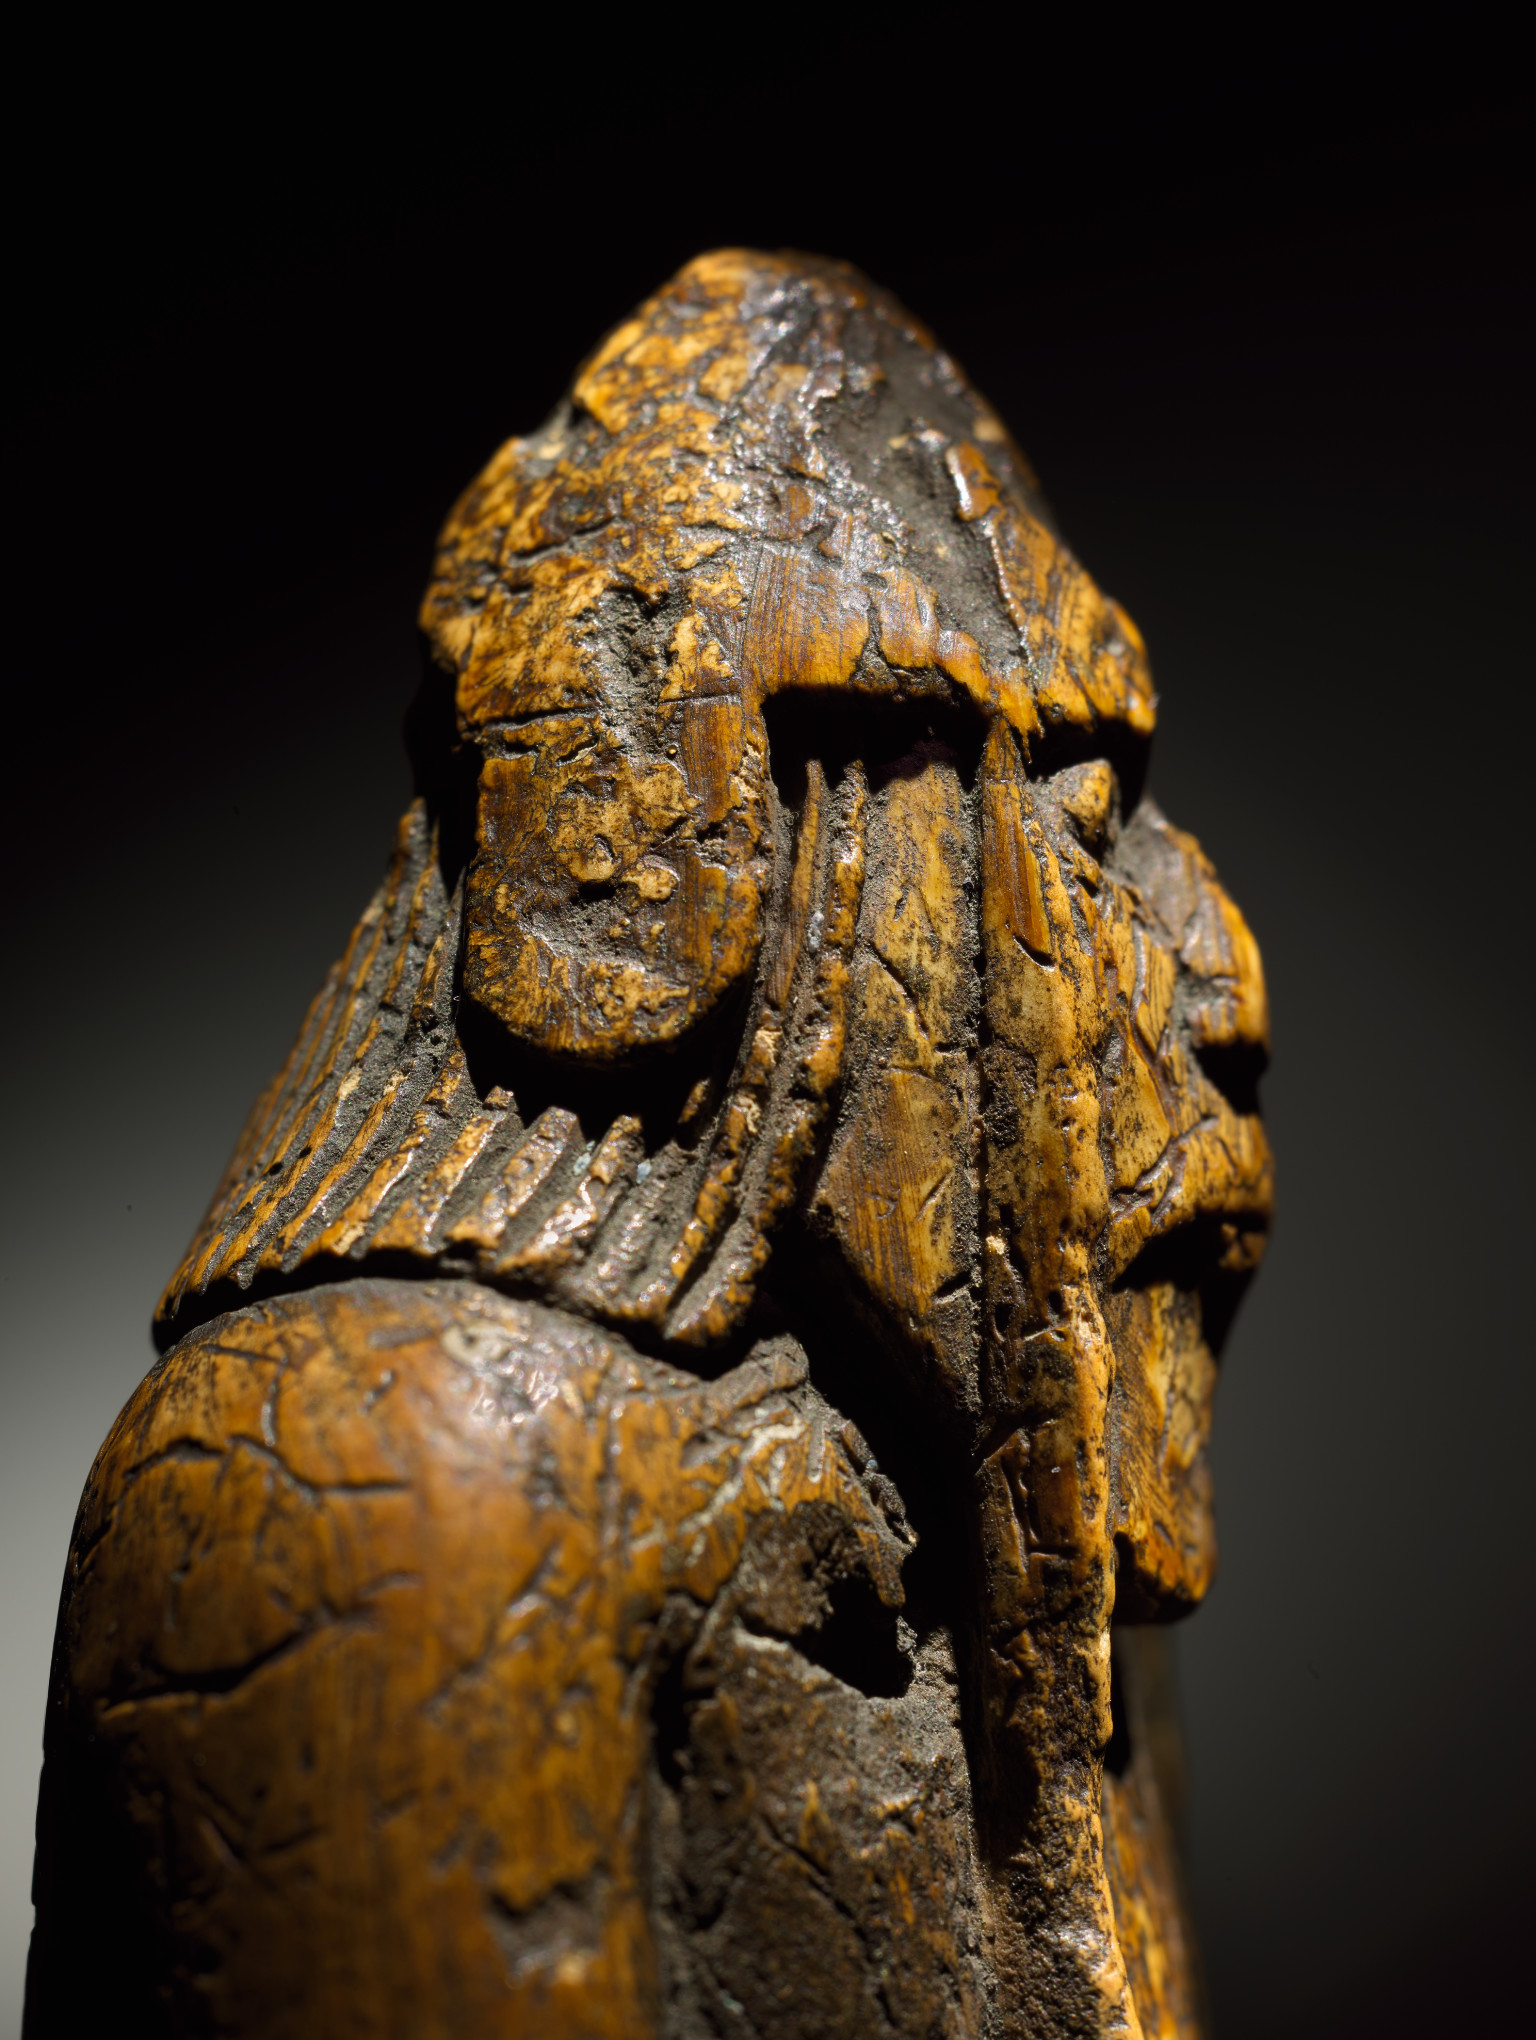 And finally… long-lost Lewis chessman found in drawer could fetch £1m